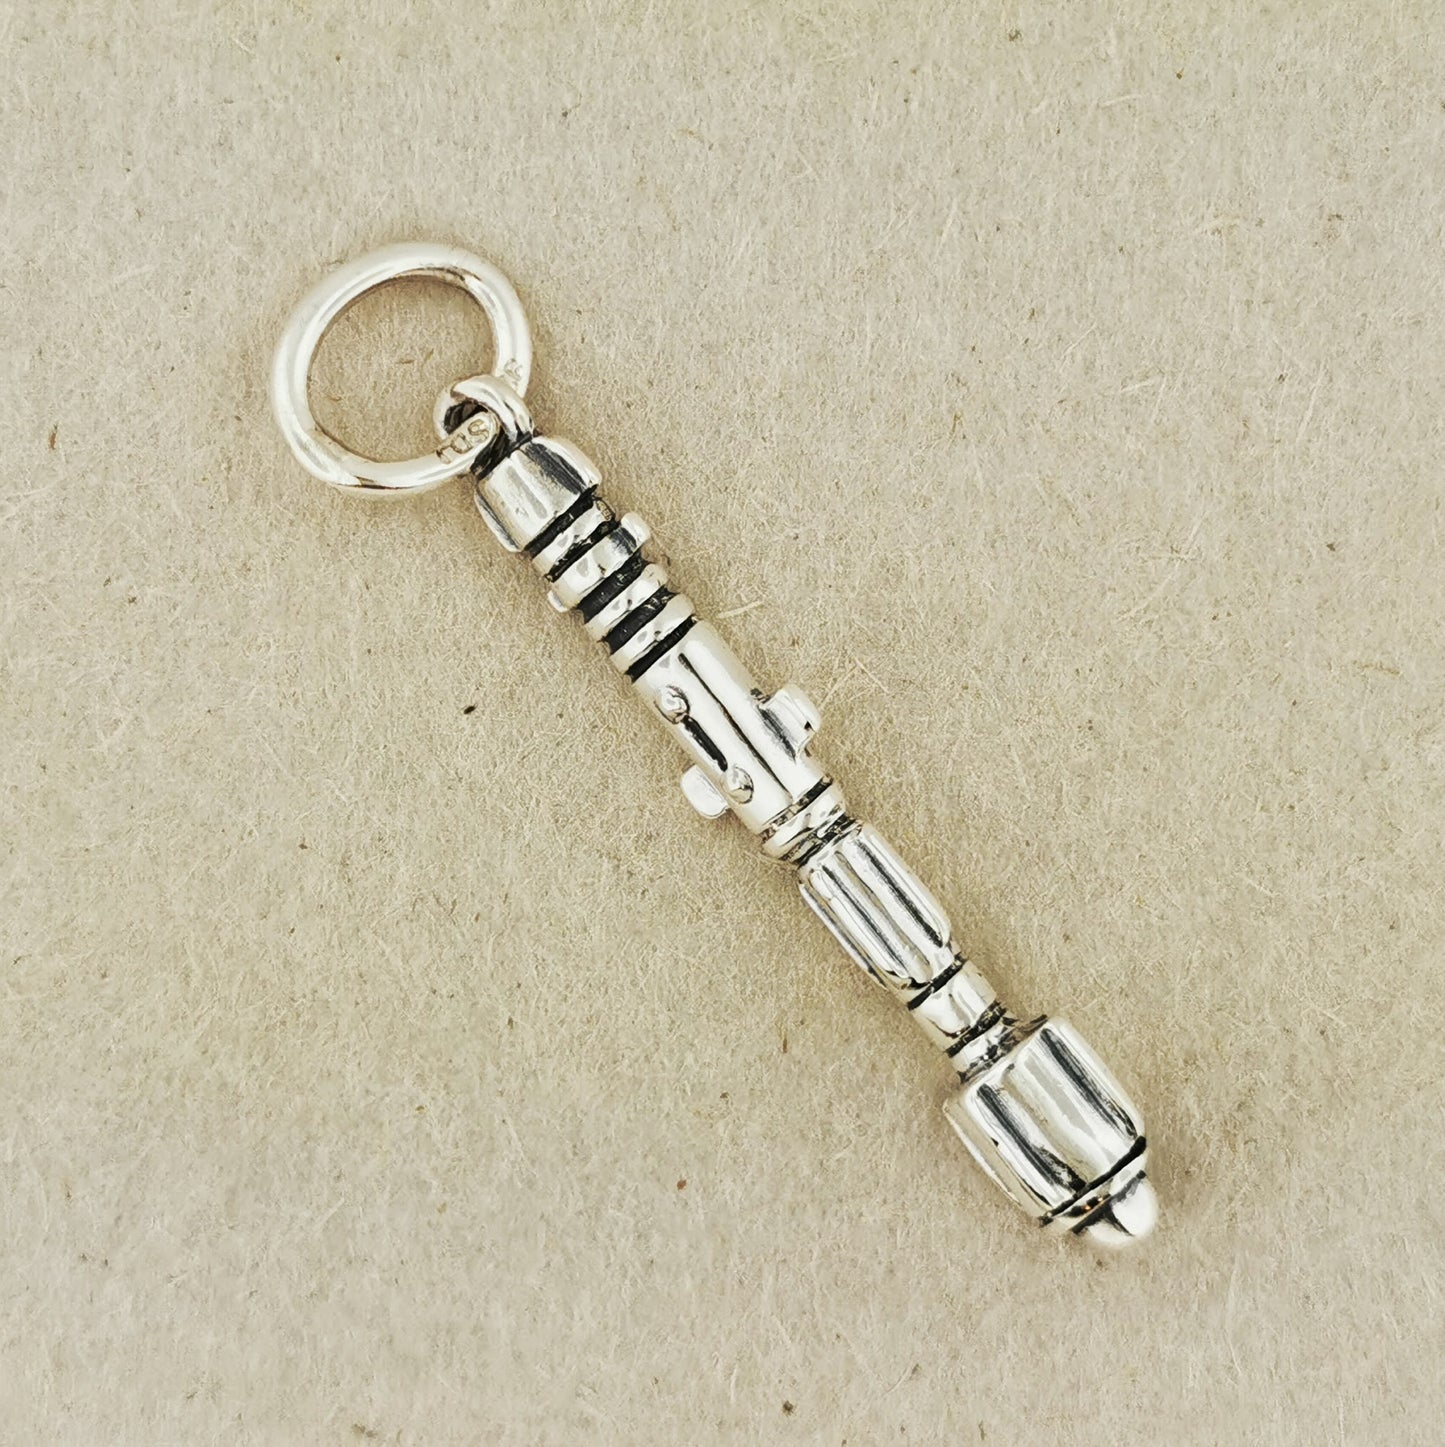 Dr. Who Sonic Screwdriver Pendant in 925 Silver or Bronze, 10th Doctor Pendant Charm, Dr Who Jewellery, 10th Screwdriver Pendant Jewelry, Sonic Screwdriver Pendant, Dr Who Pendant, Silver Screwdriver Pendant, Sci Fi Pendant, Dr Who Tardis Pendant